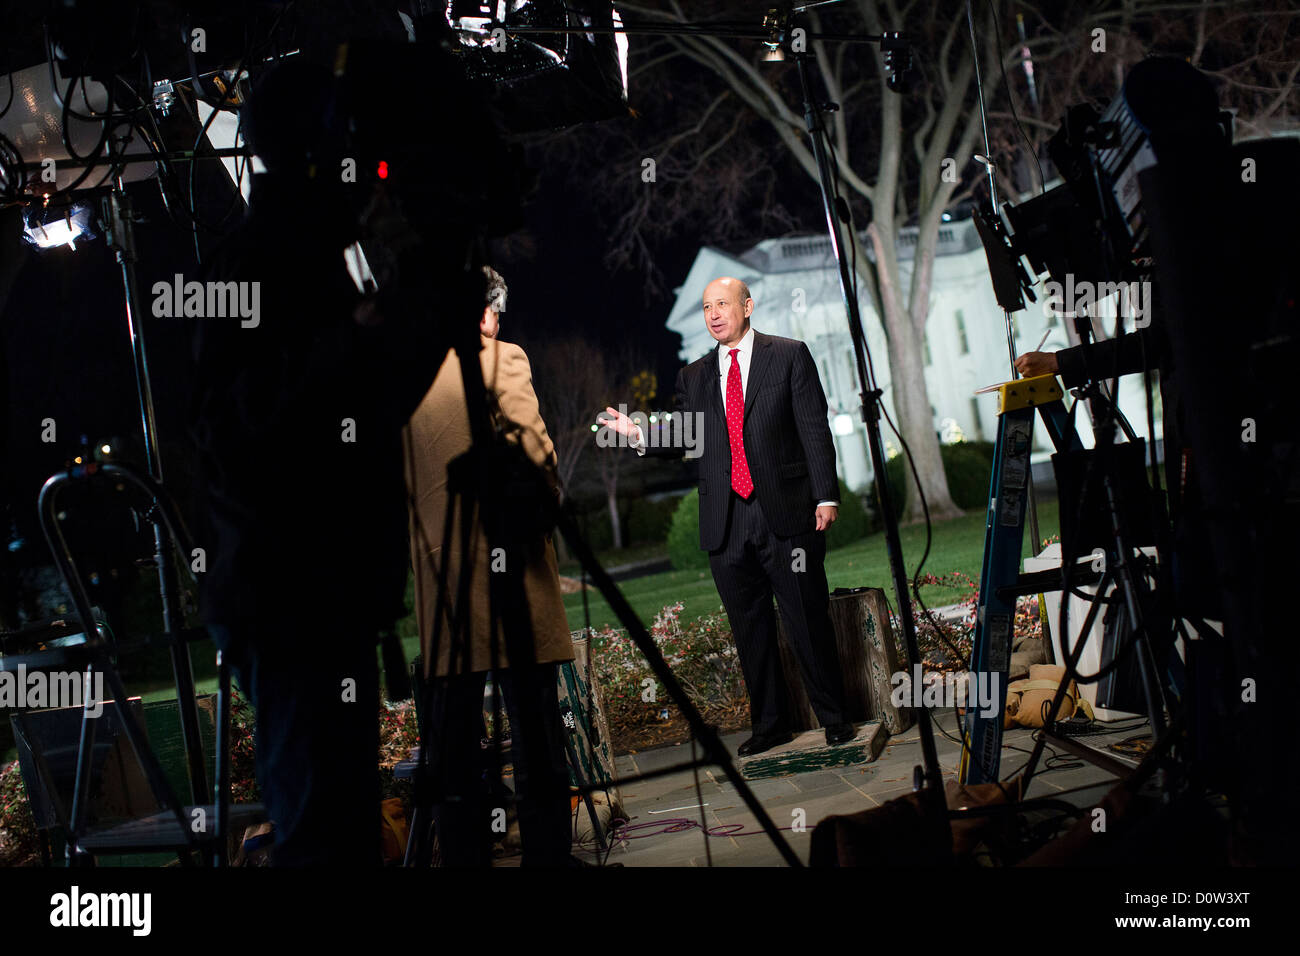 Lloyd Blankfein, Chairman and CEO of Goldman Sachs speaks outside of the White House.  Stock Photo